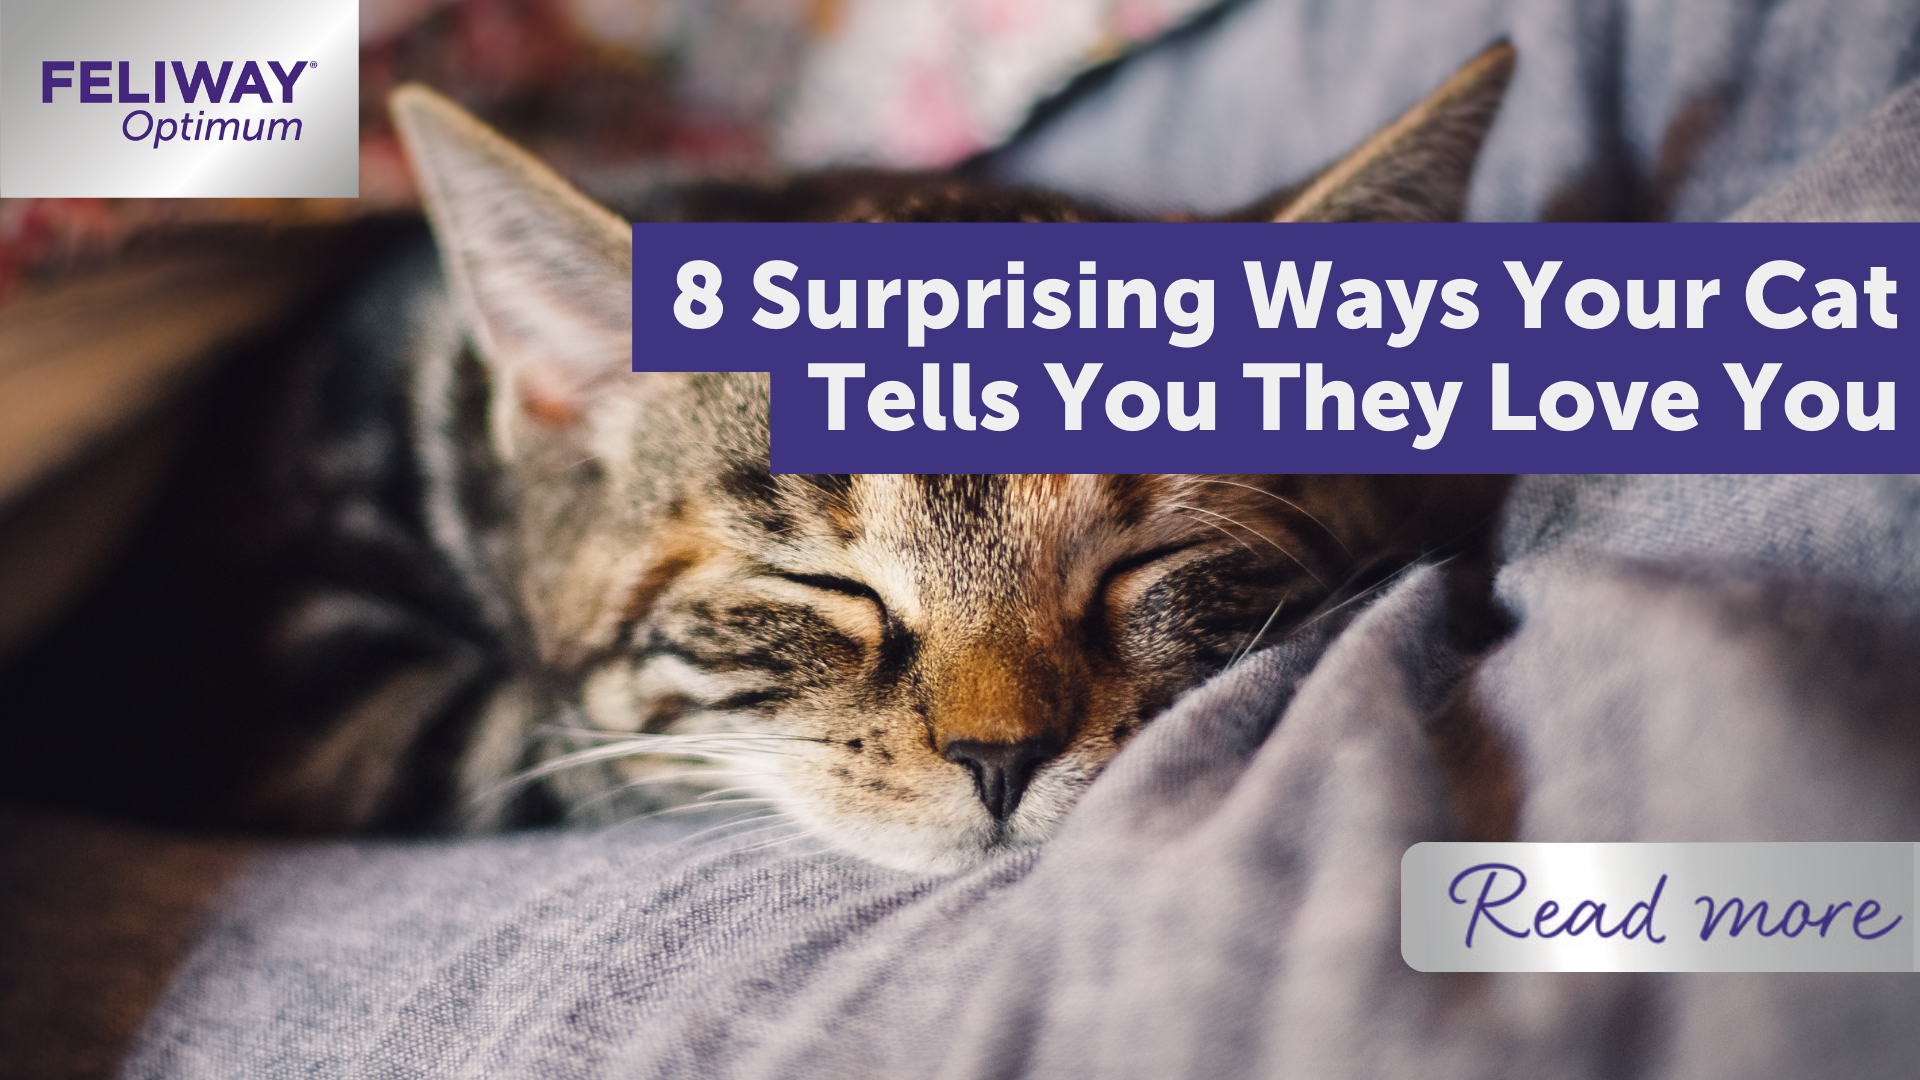 8 surprising ways your cat tells you they love¬†you